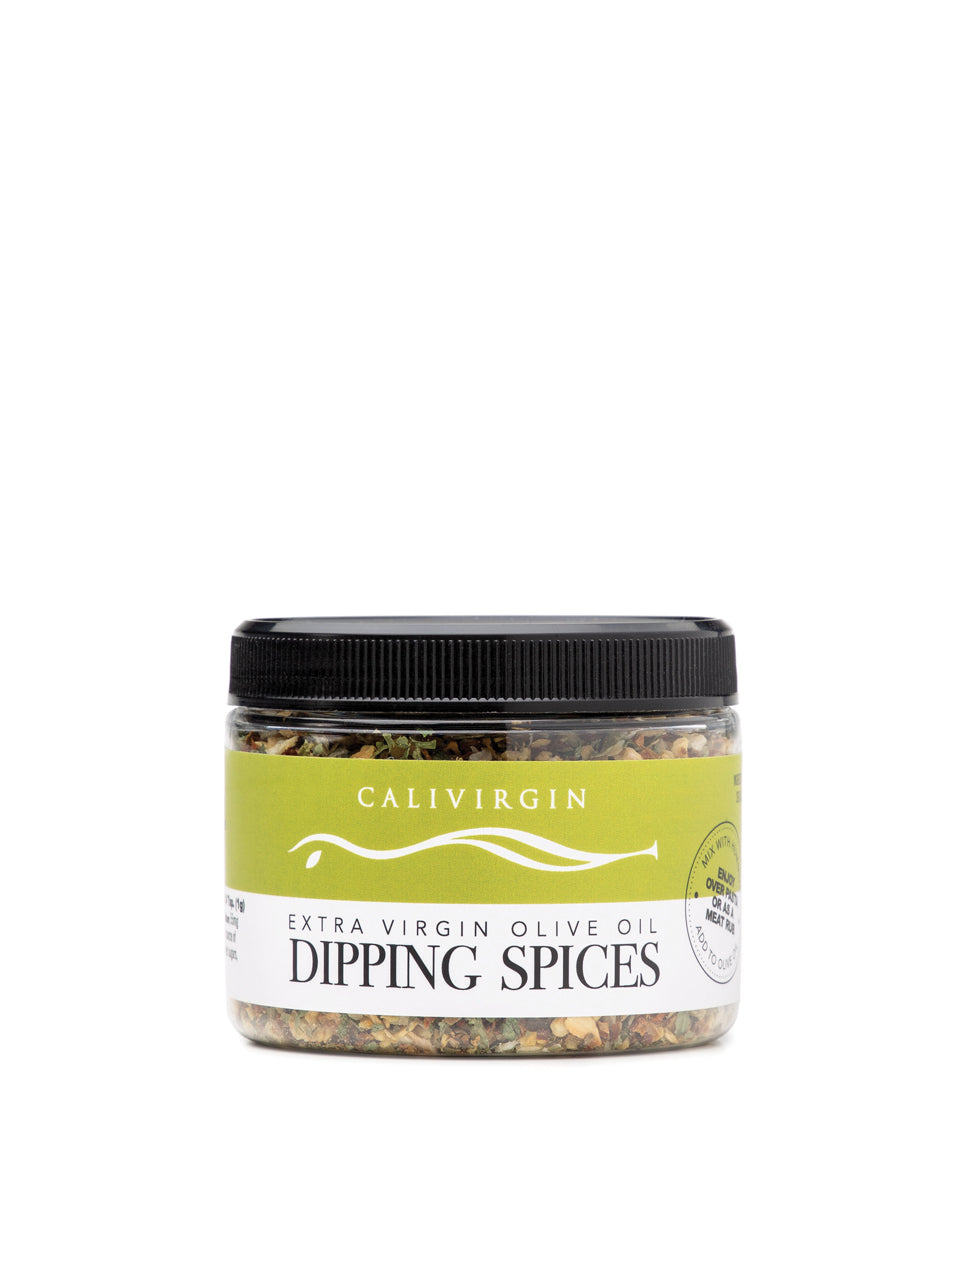 Calivirgin Dipping Spices 12-Pack